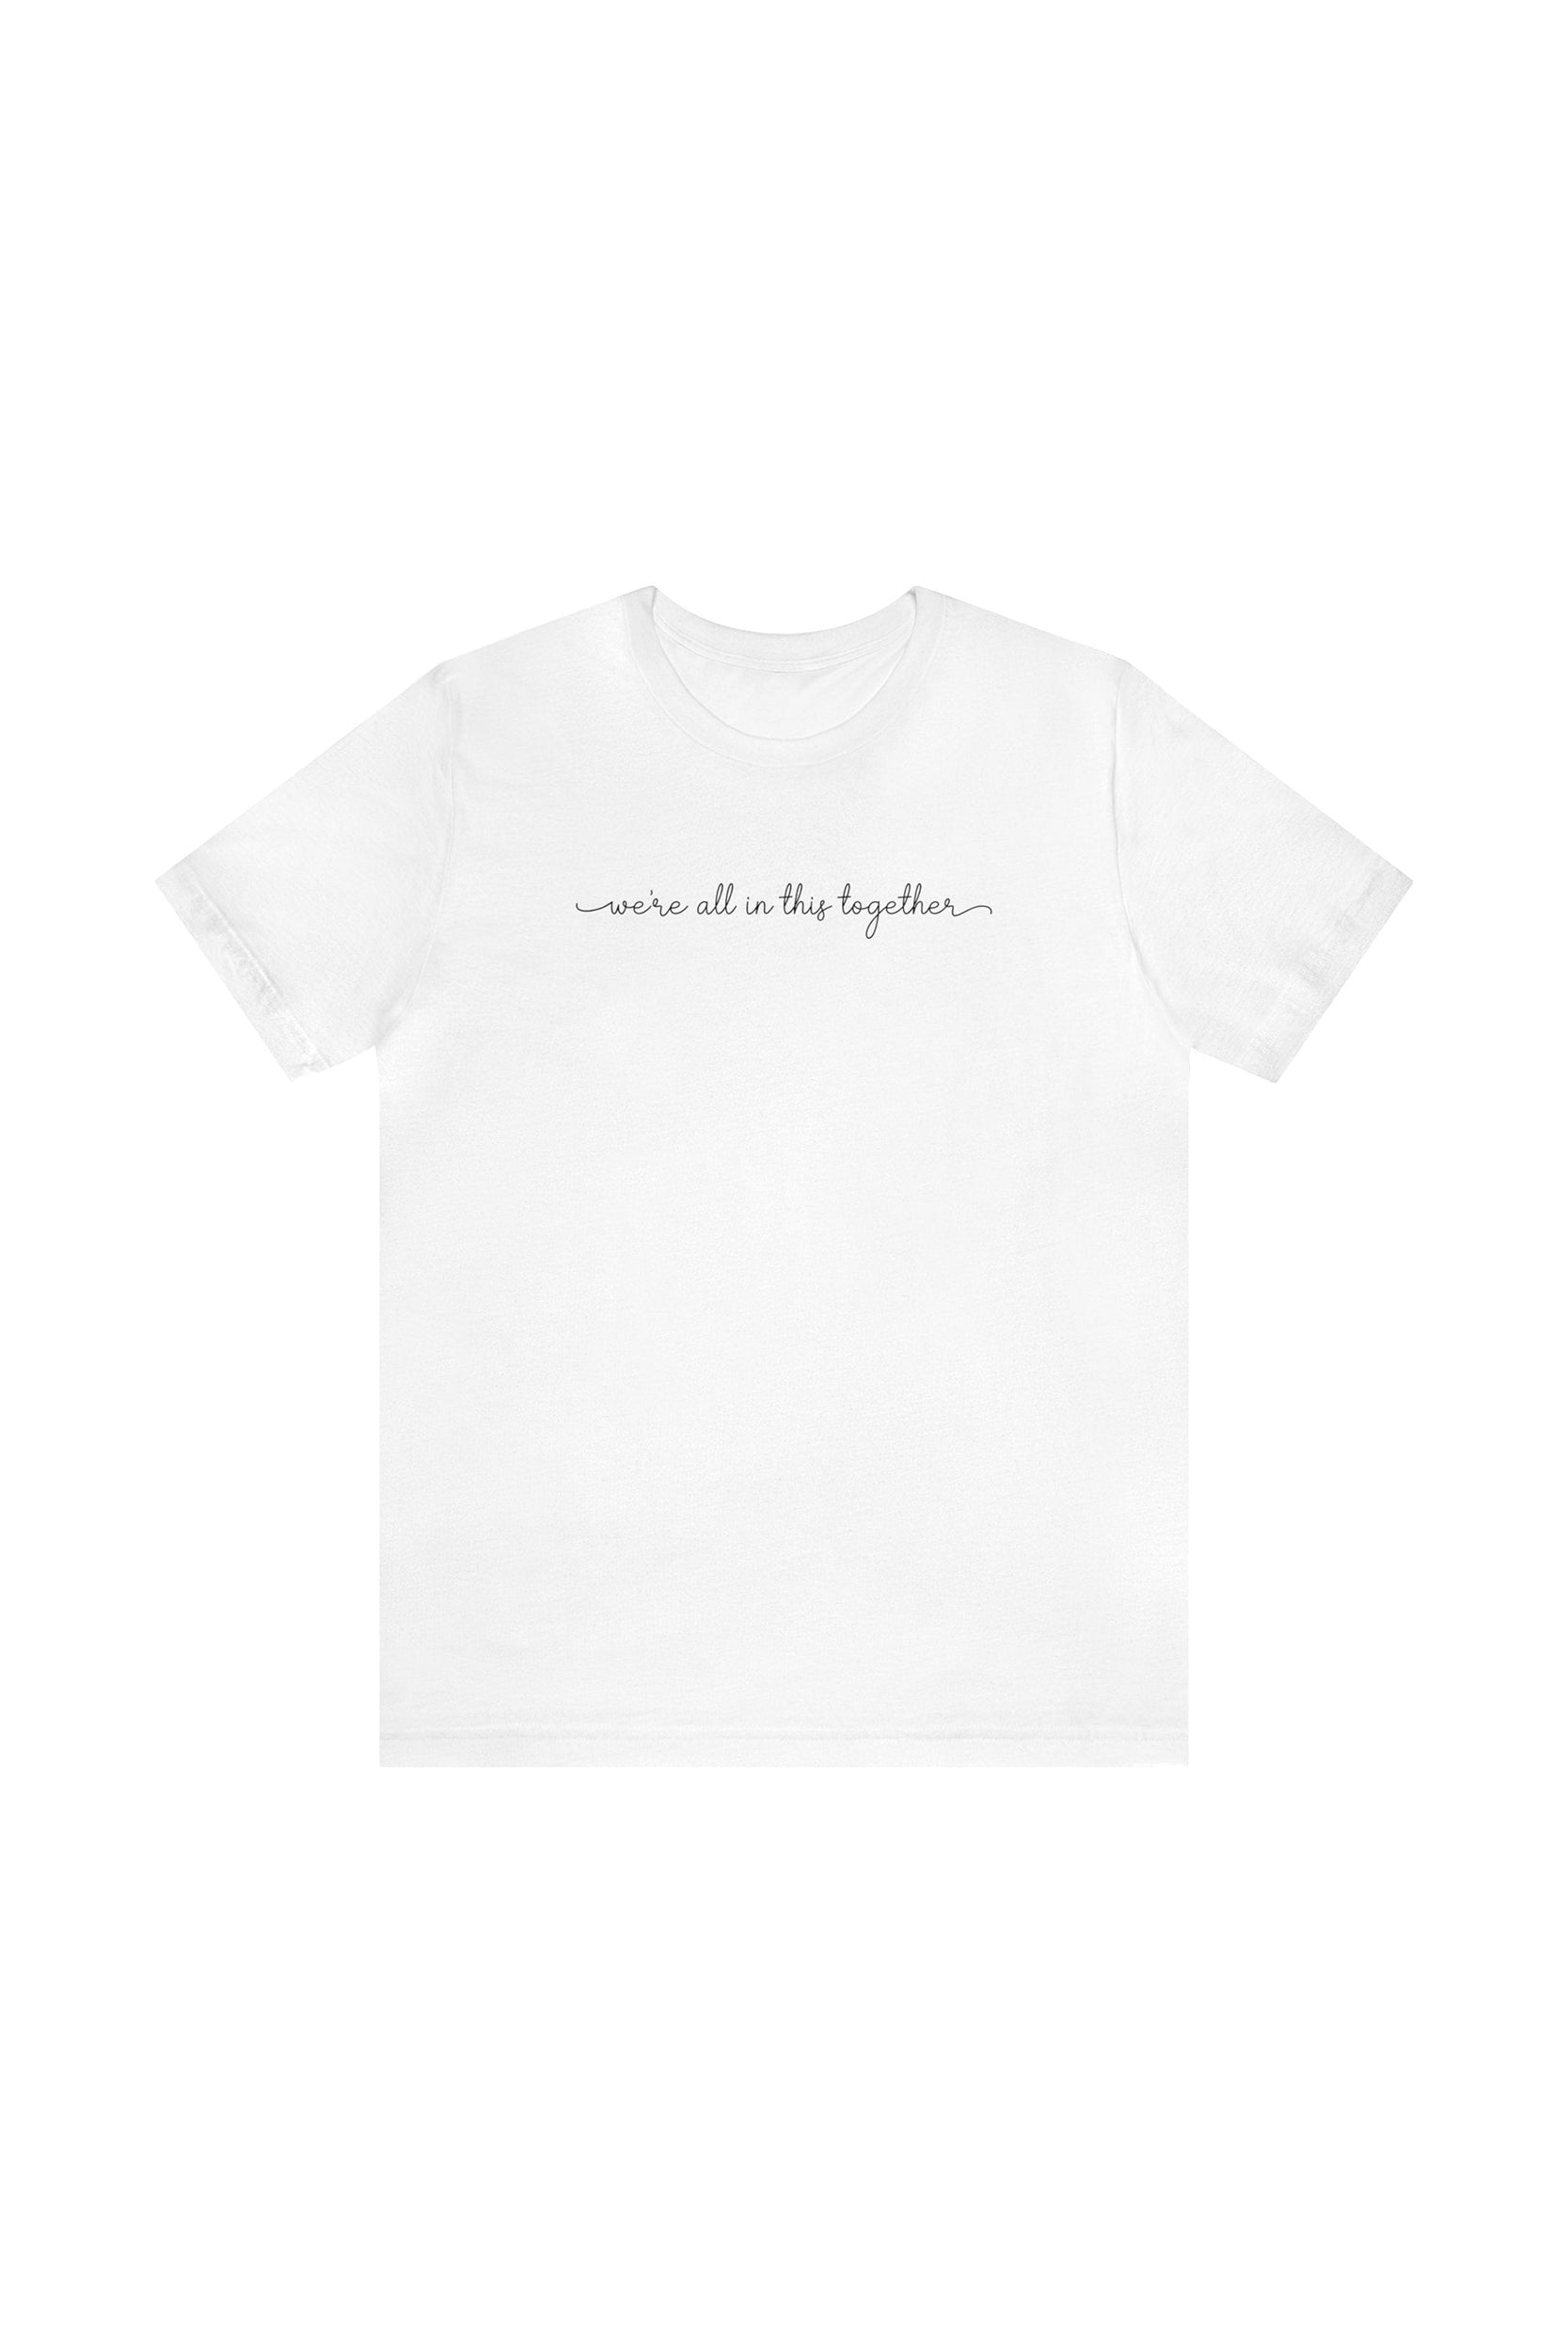 "we're all in this together" T-Shirt